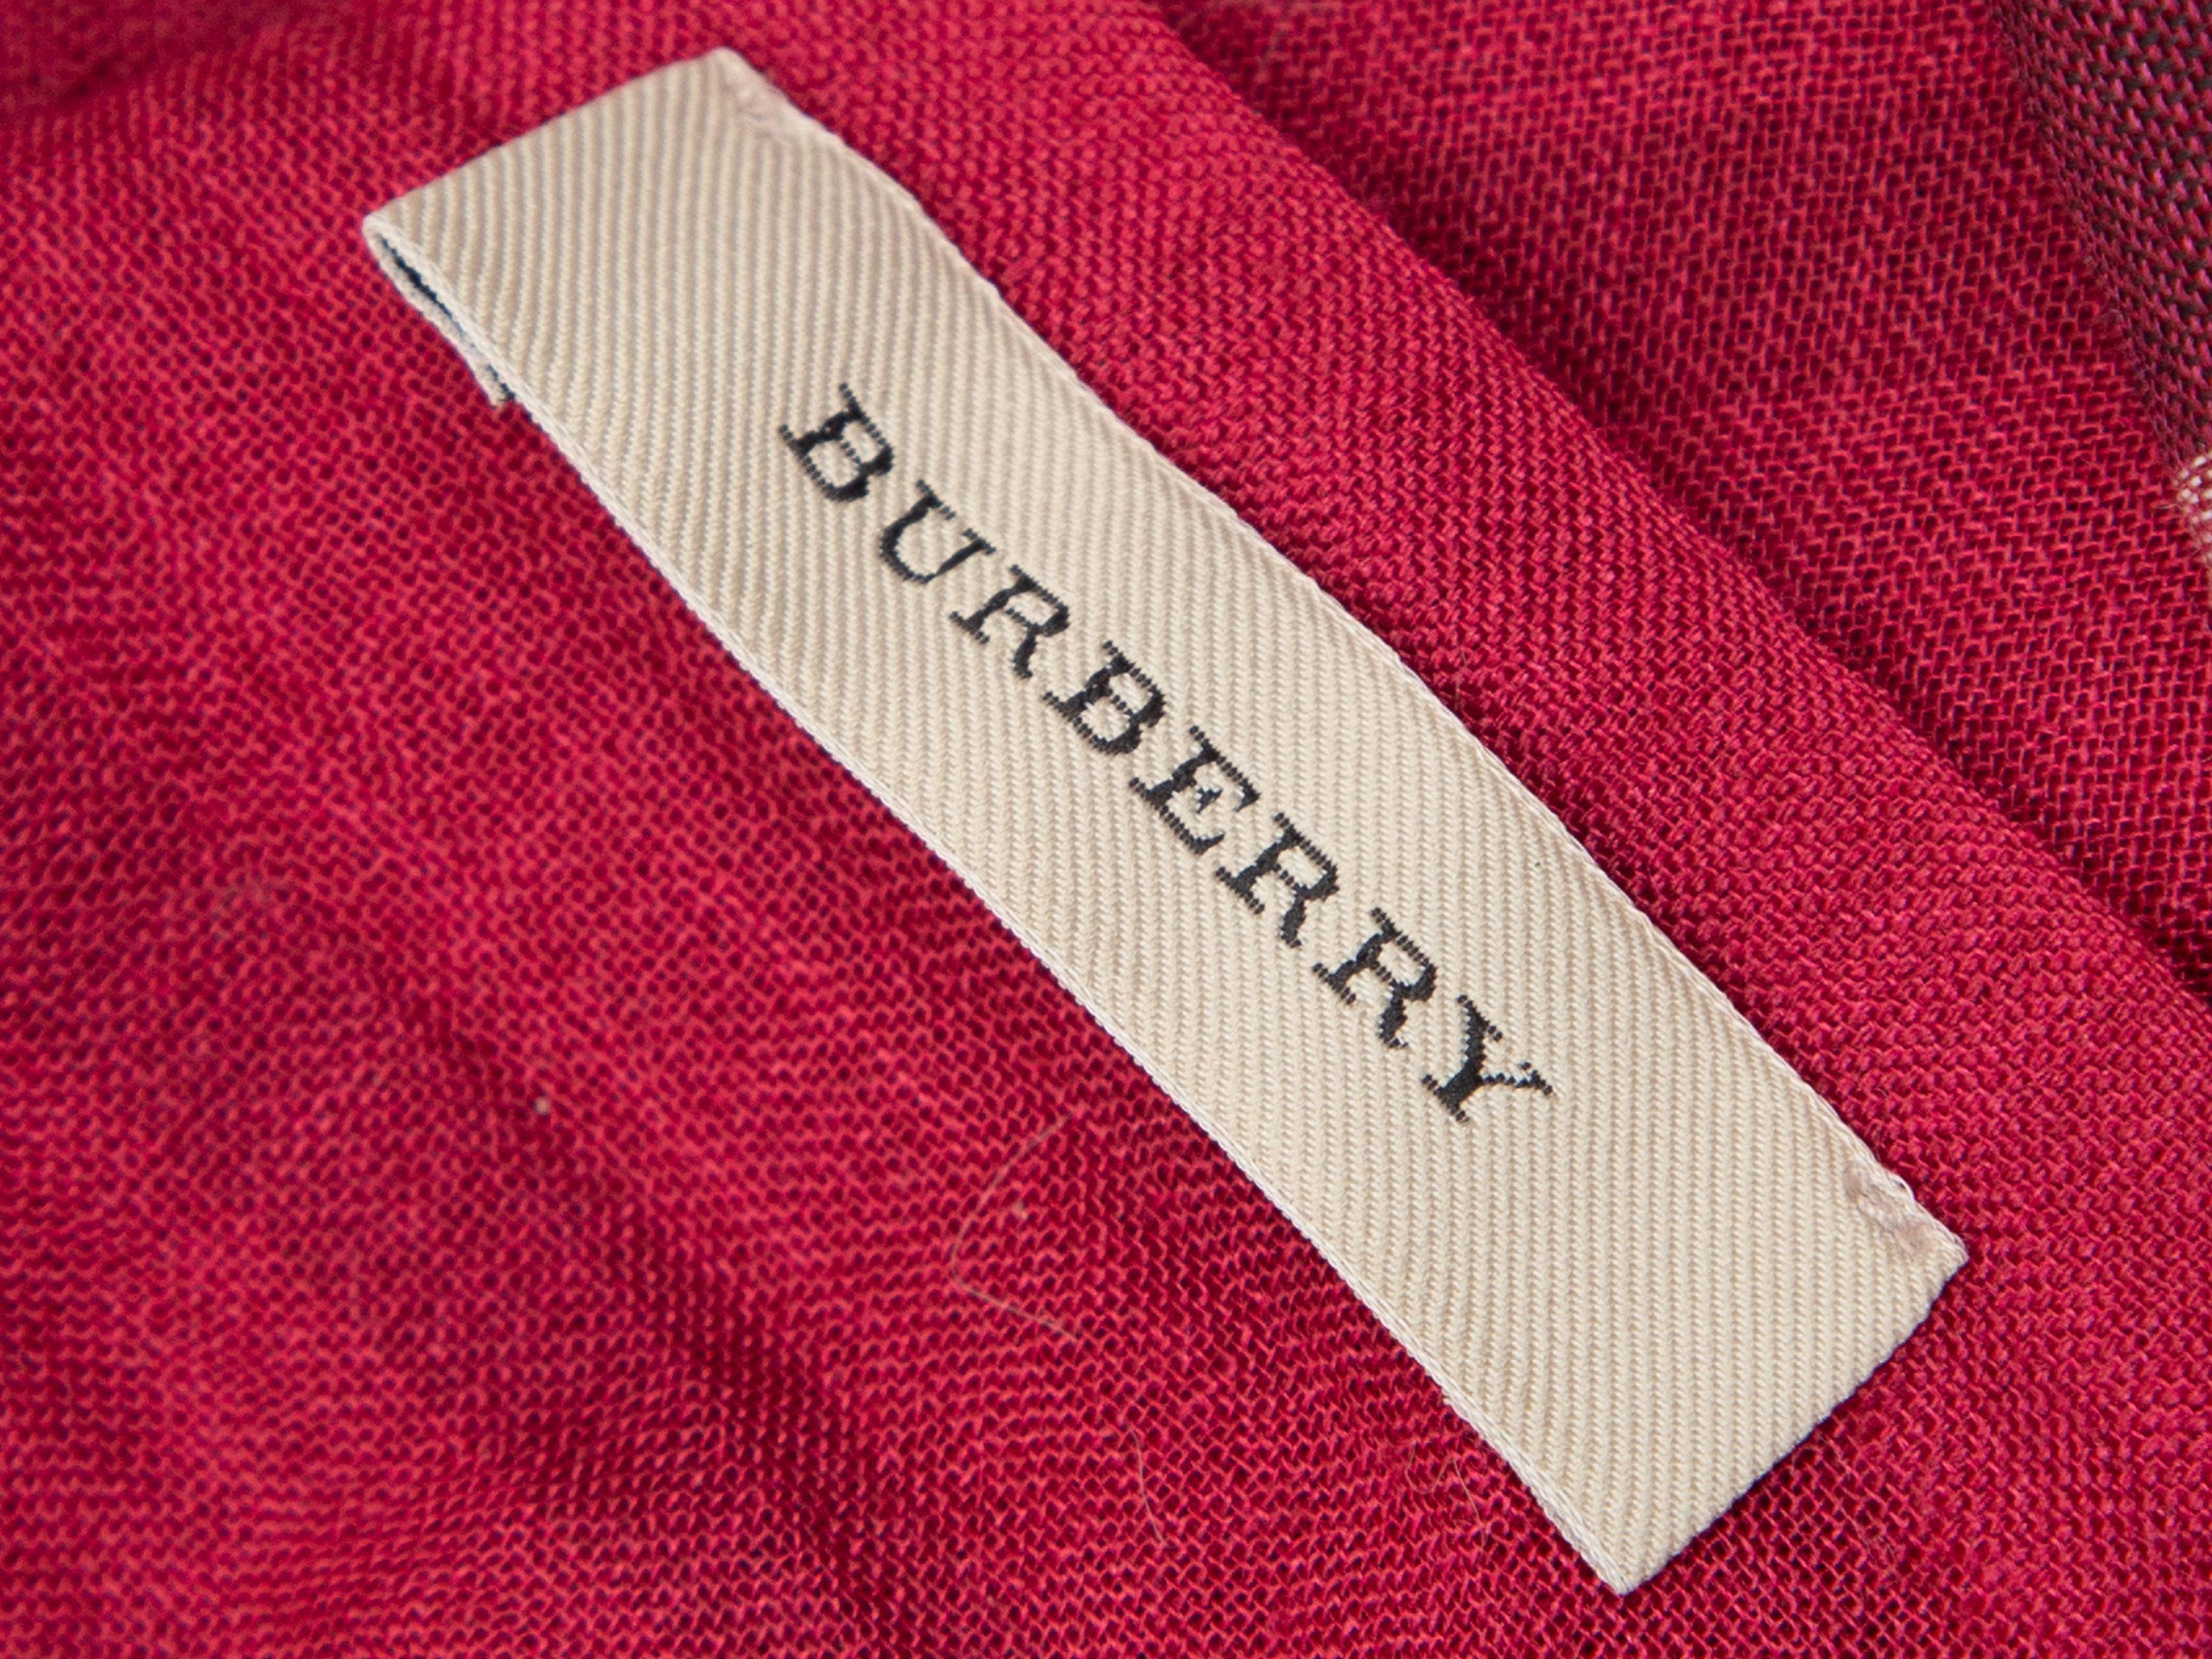 Product details: Red, black, and white silk-blend Nova Check scarf by Burberry. Fringe trim at ends. 28.5